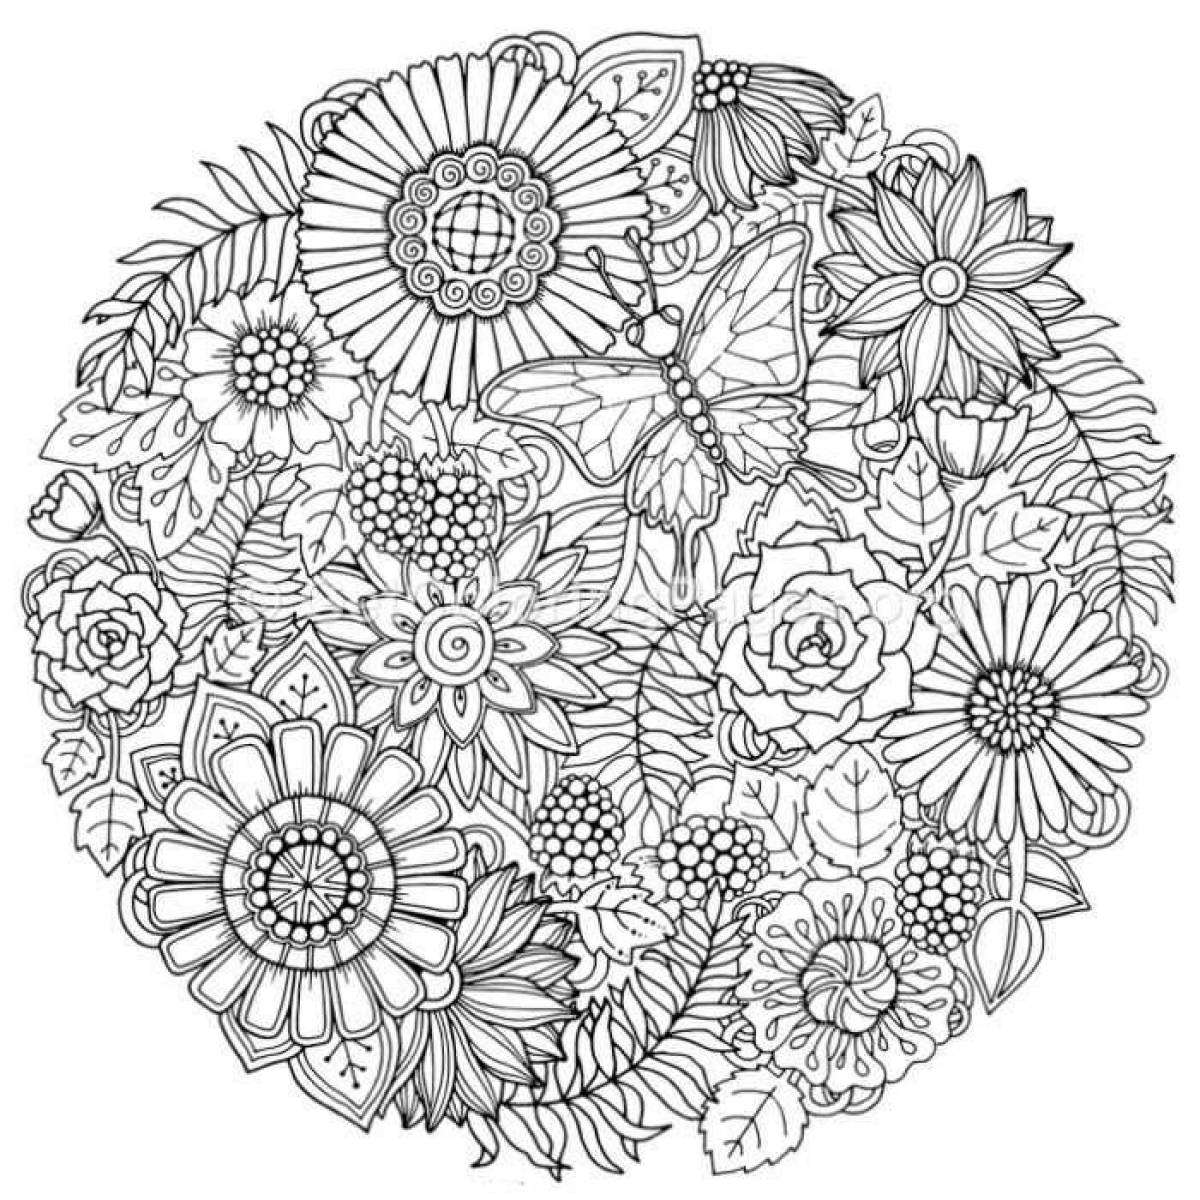 Adorable anti-stress coloring book for adults